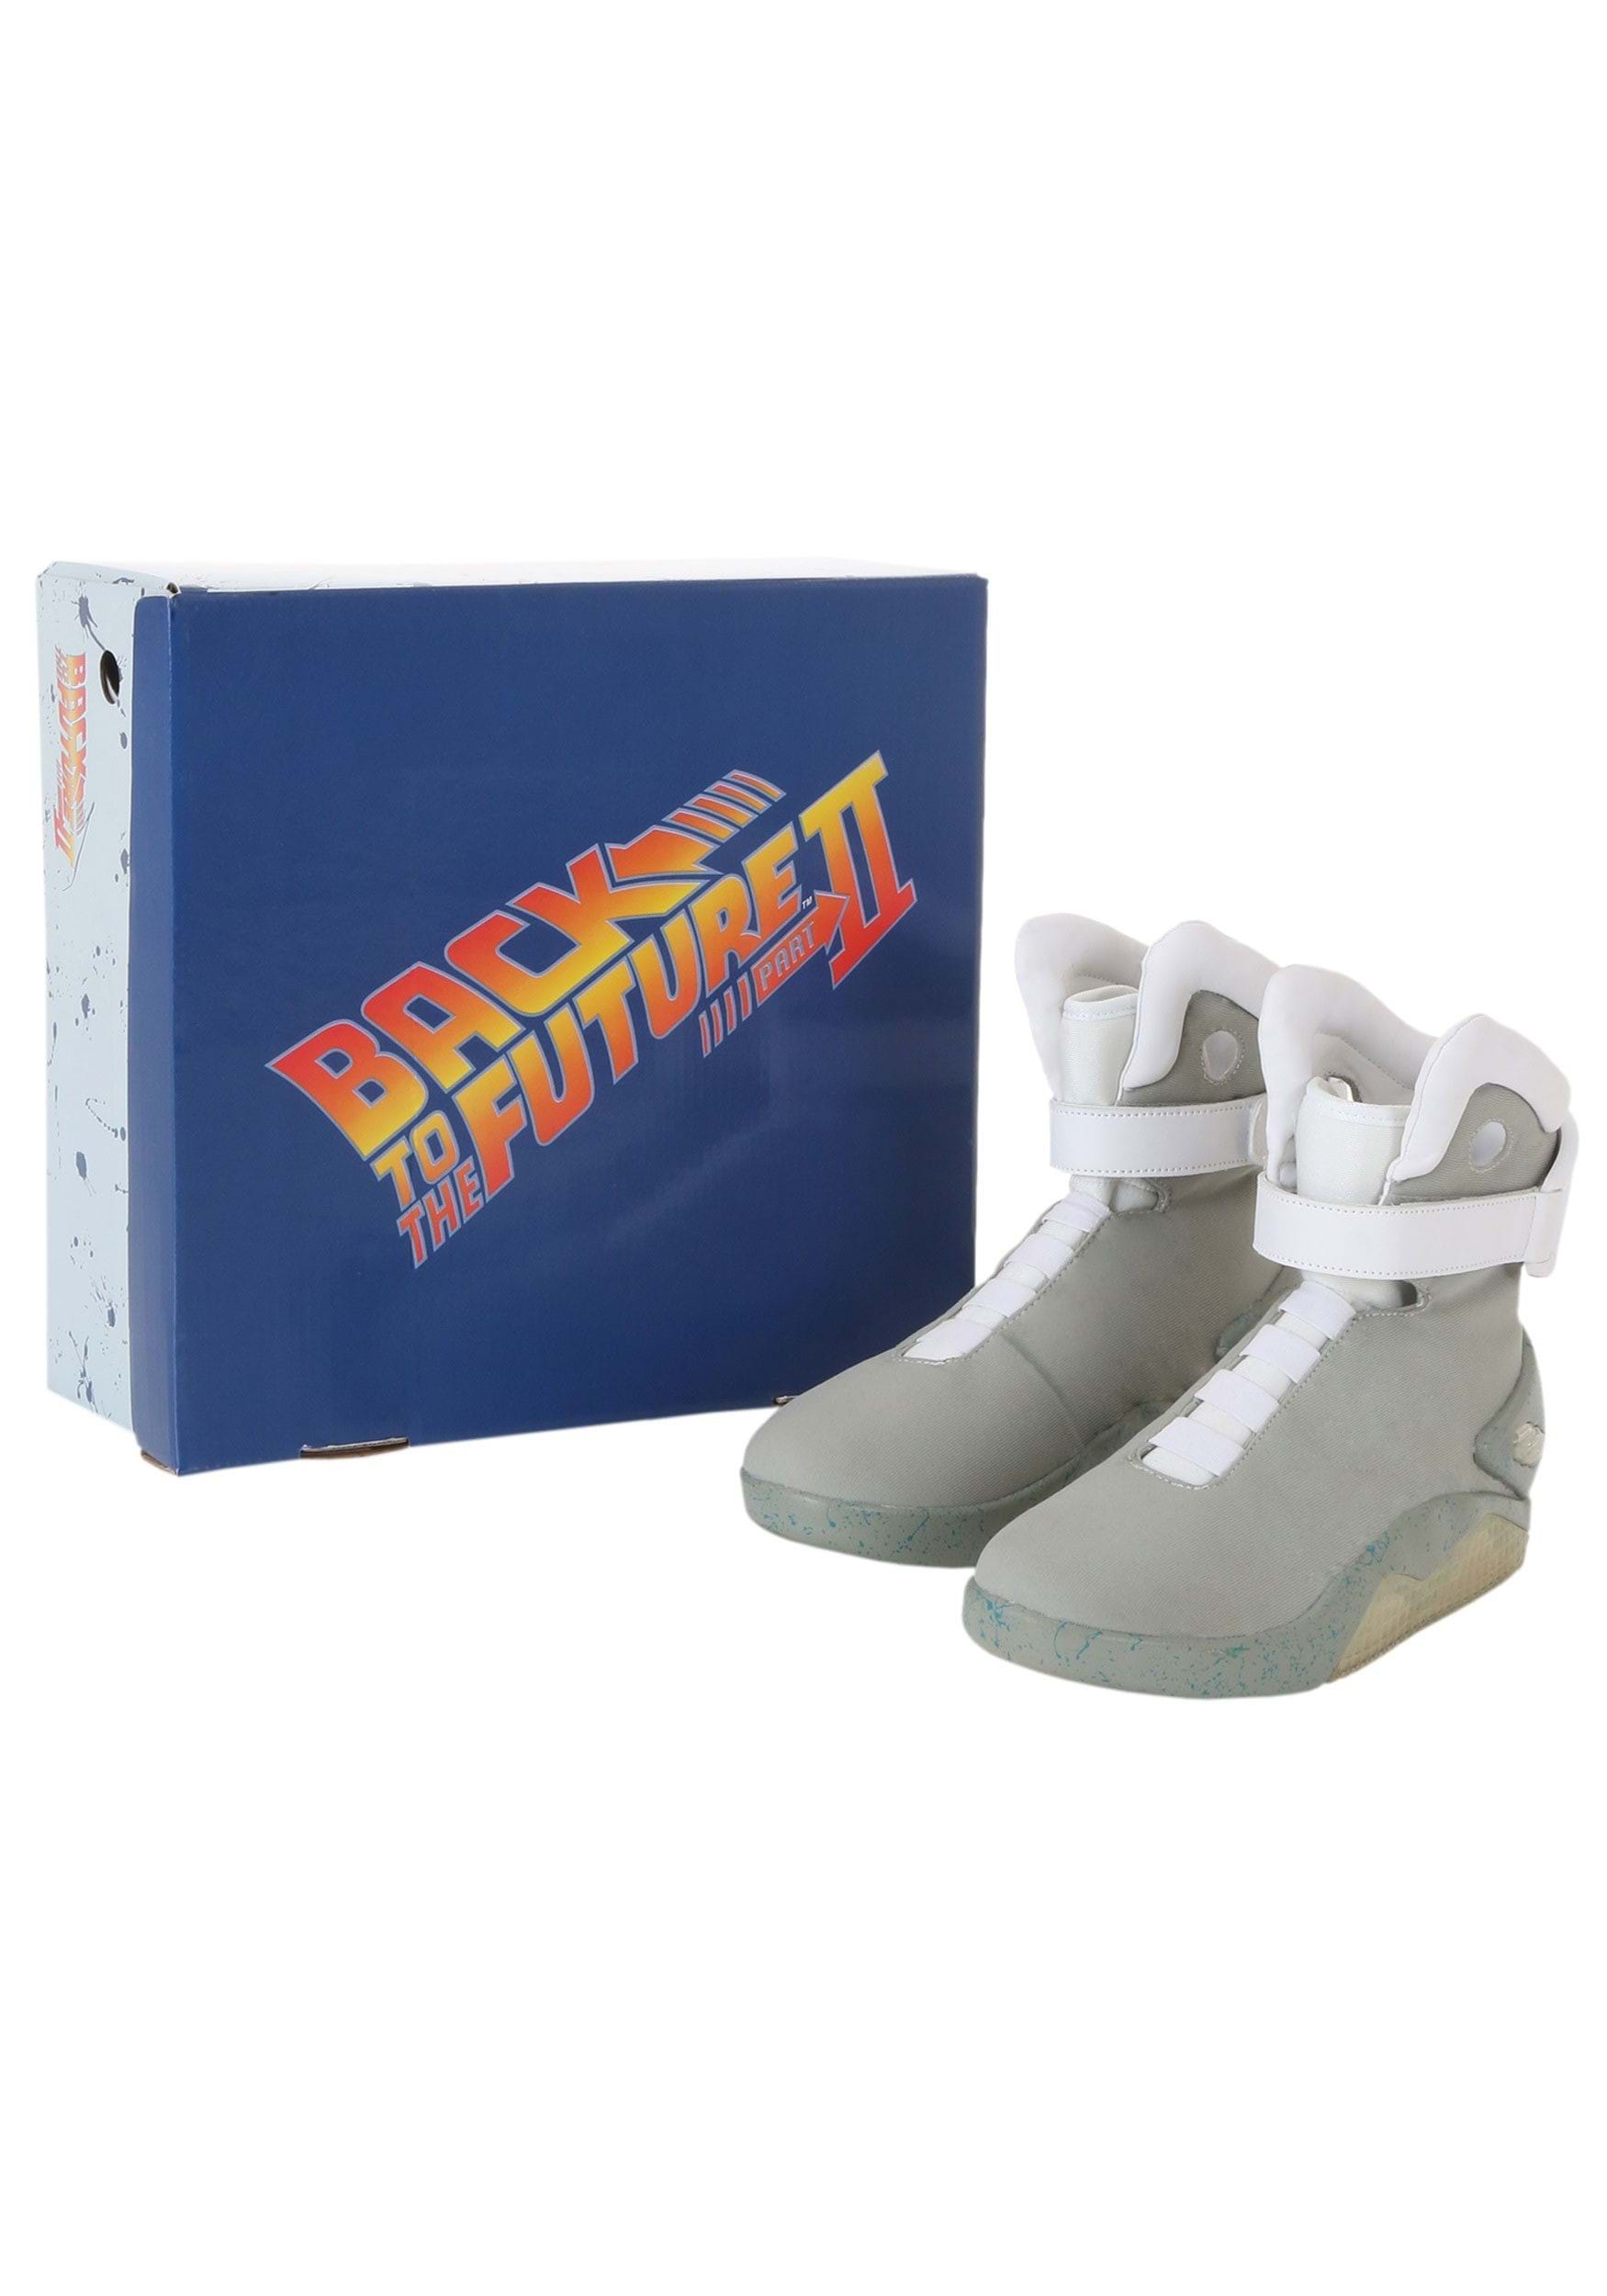 GlowStrides LED Boot Sneakers (Back to the Future Edition